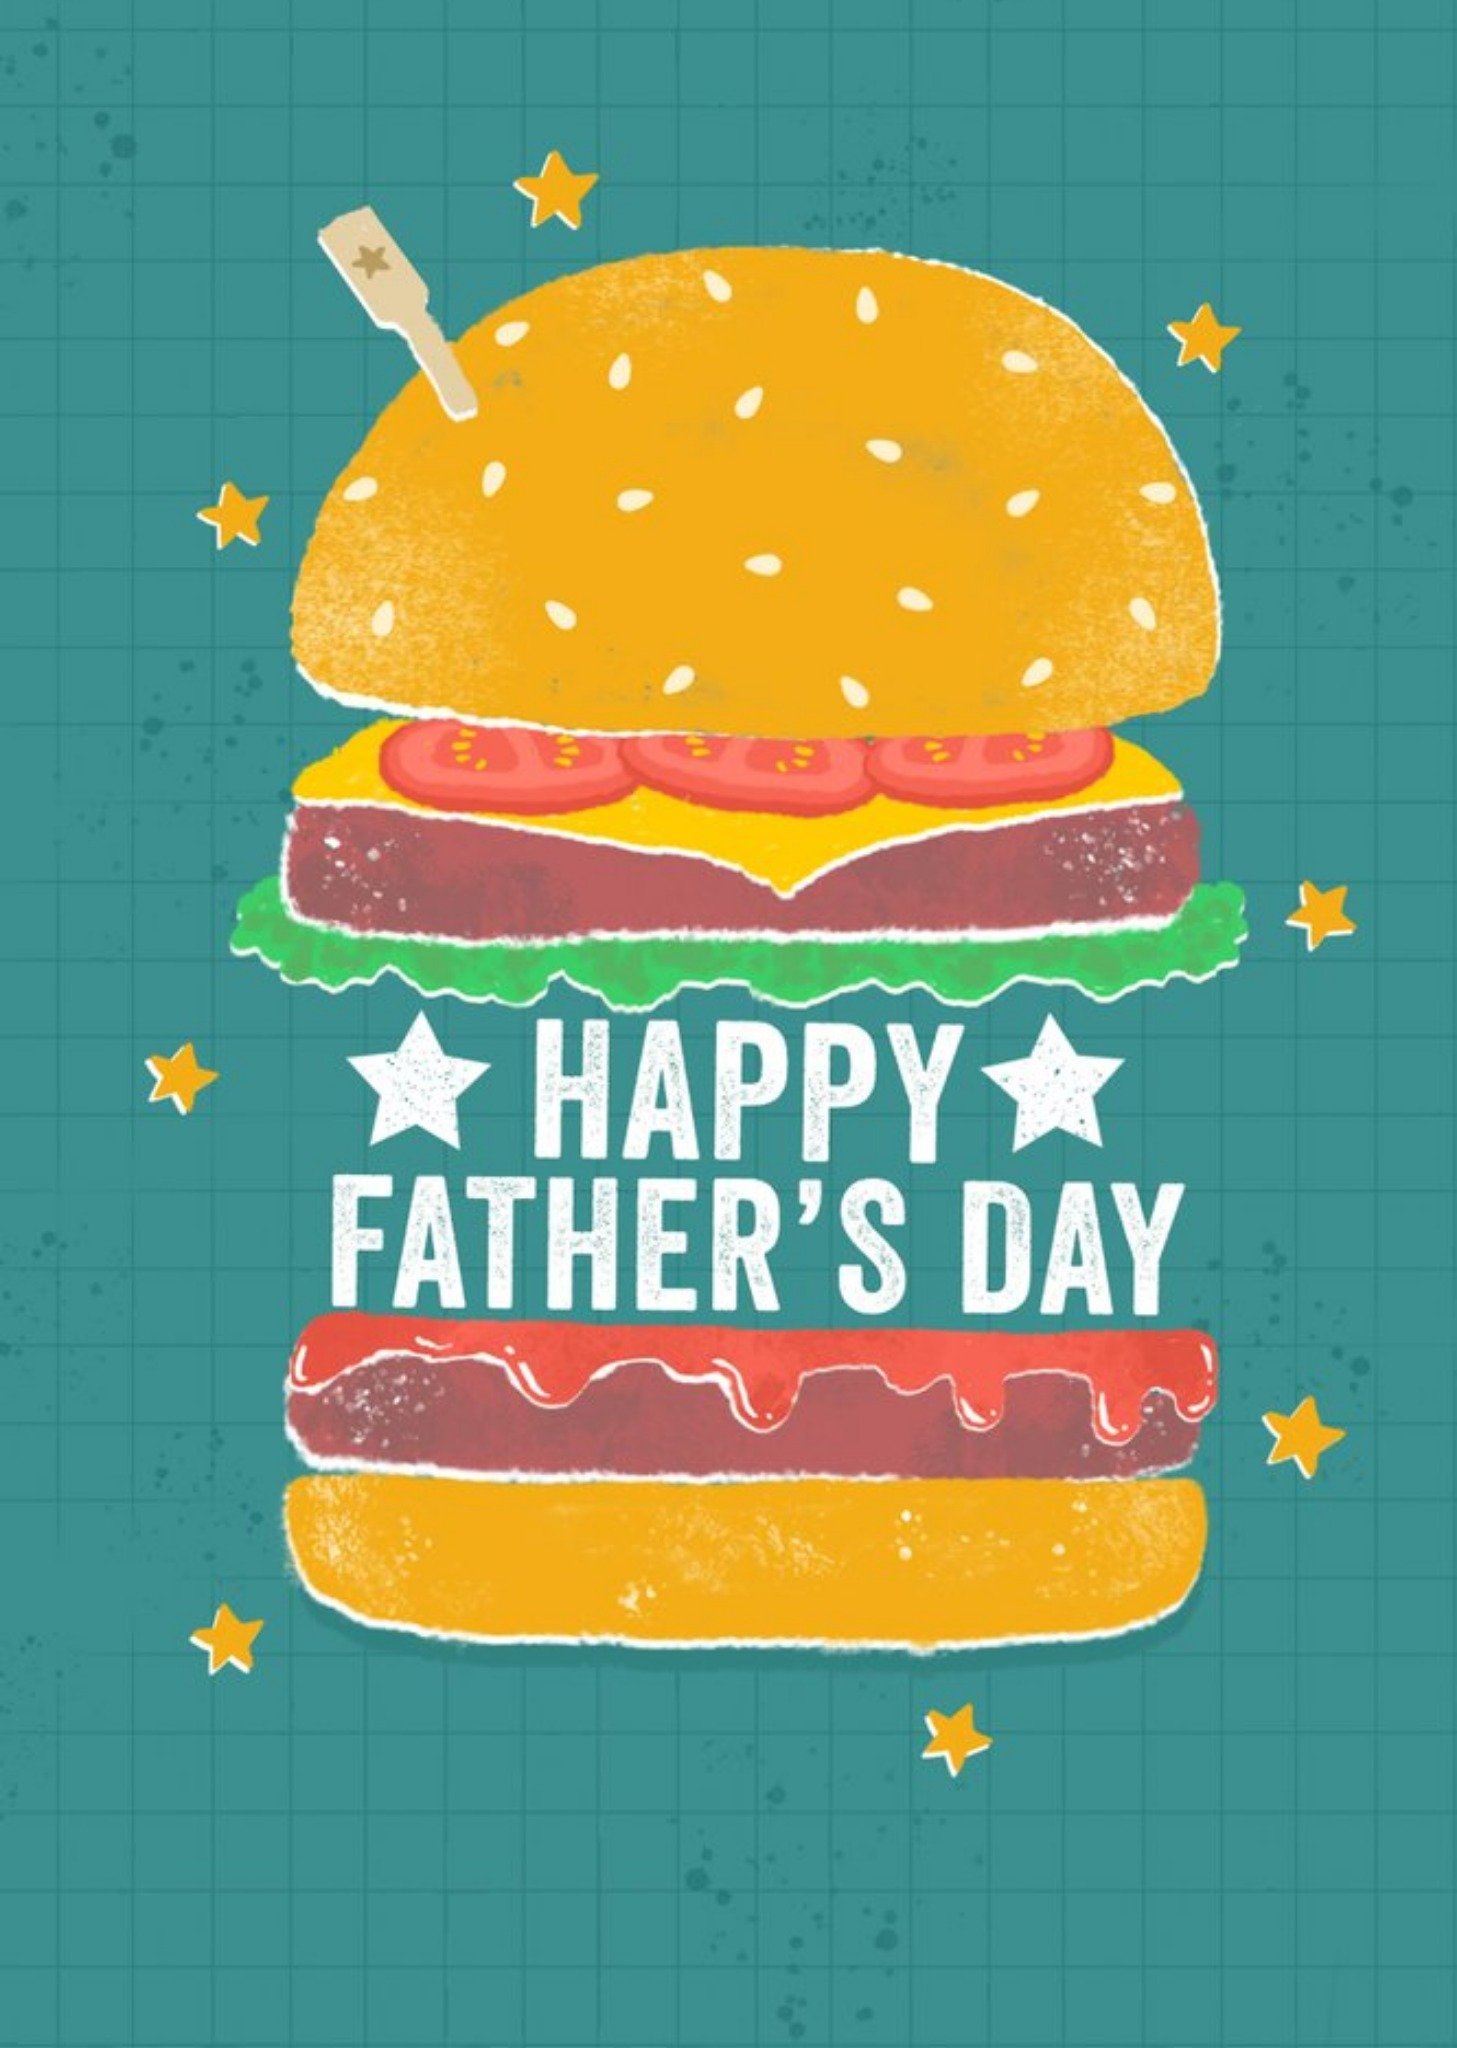 Moonpig Illustrated Burger Happy Father's Day Card Ecard